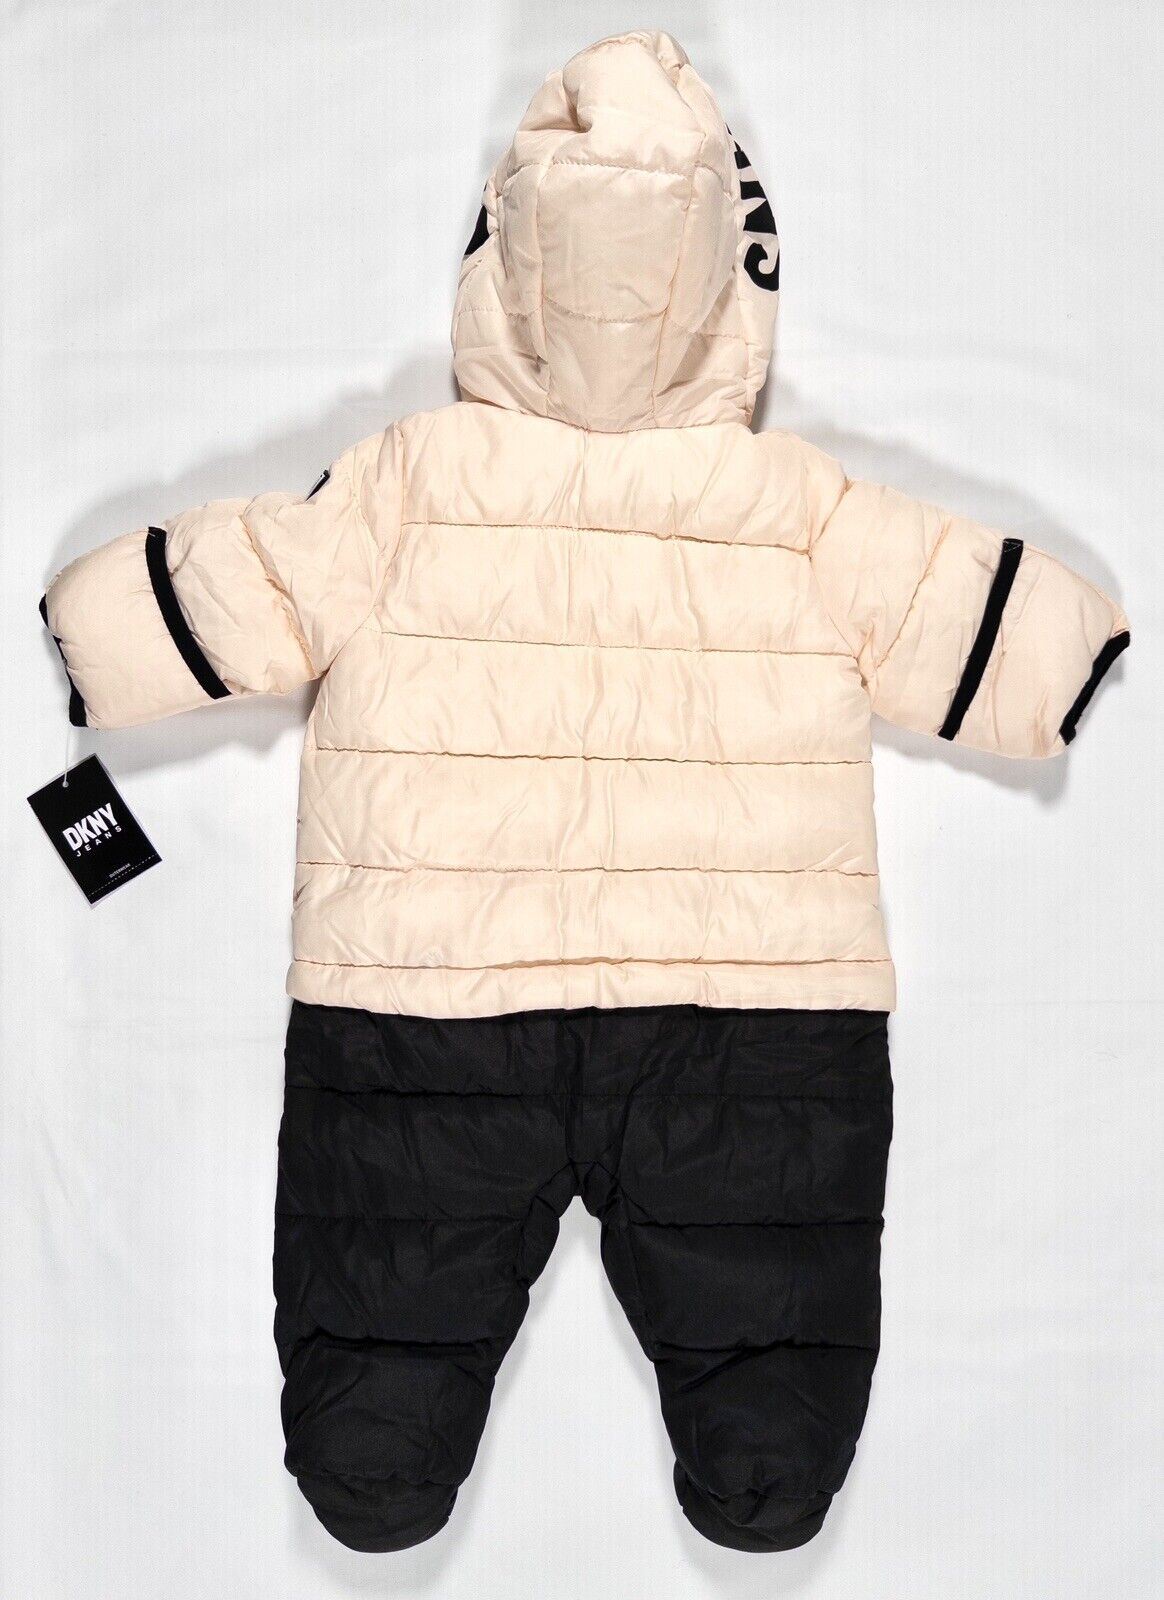 DKNY JEANS Baby Girls All in One Snowsuit Pink Black Size UK 3-6 Months